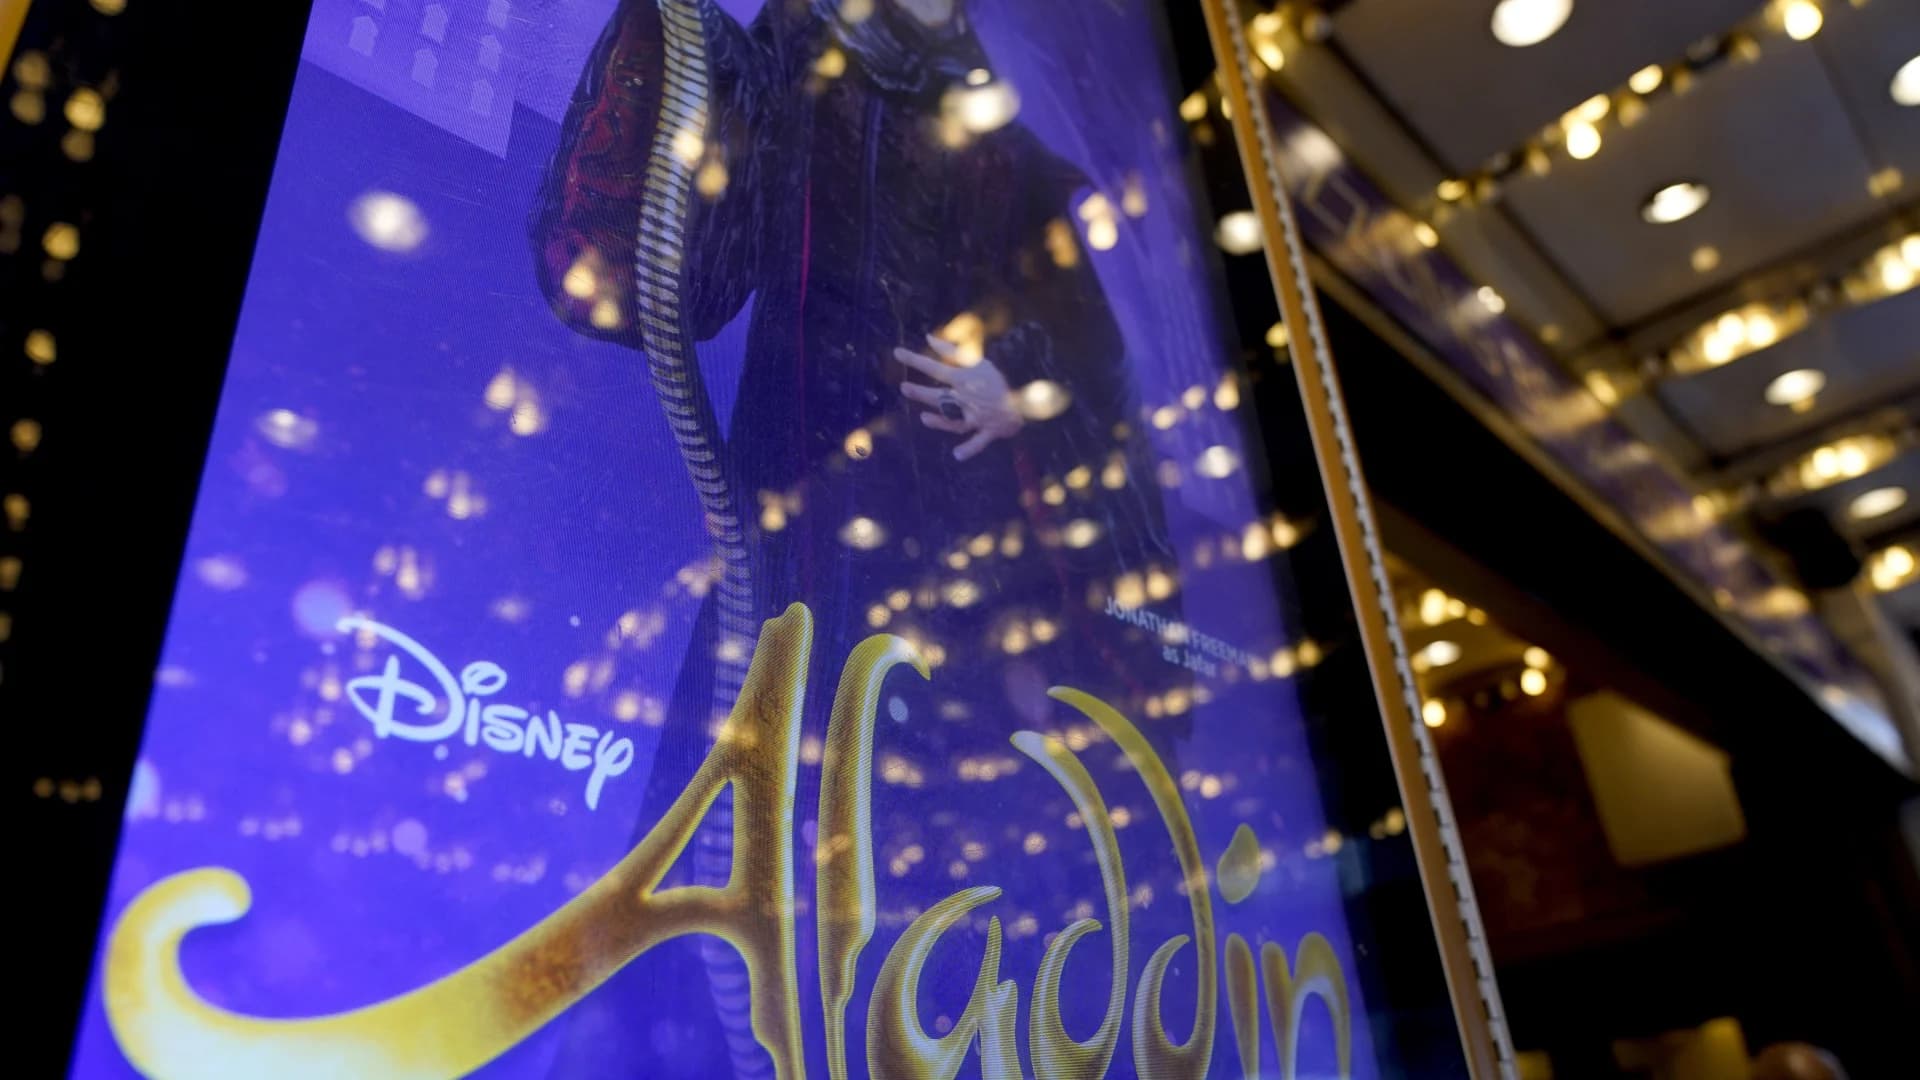 Broadway's 'Aladdin' goes dark for days as it battles COVID-19